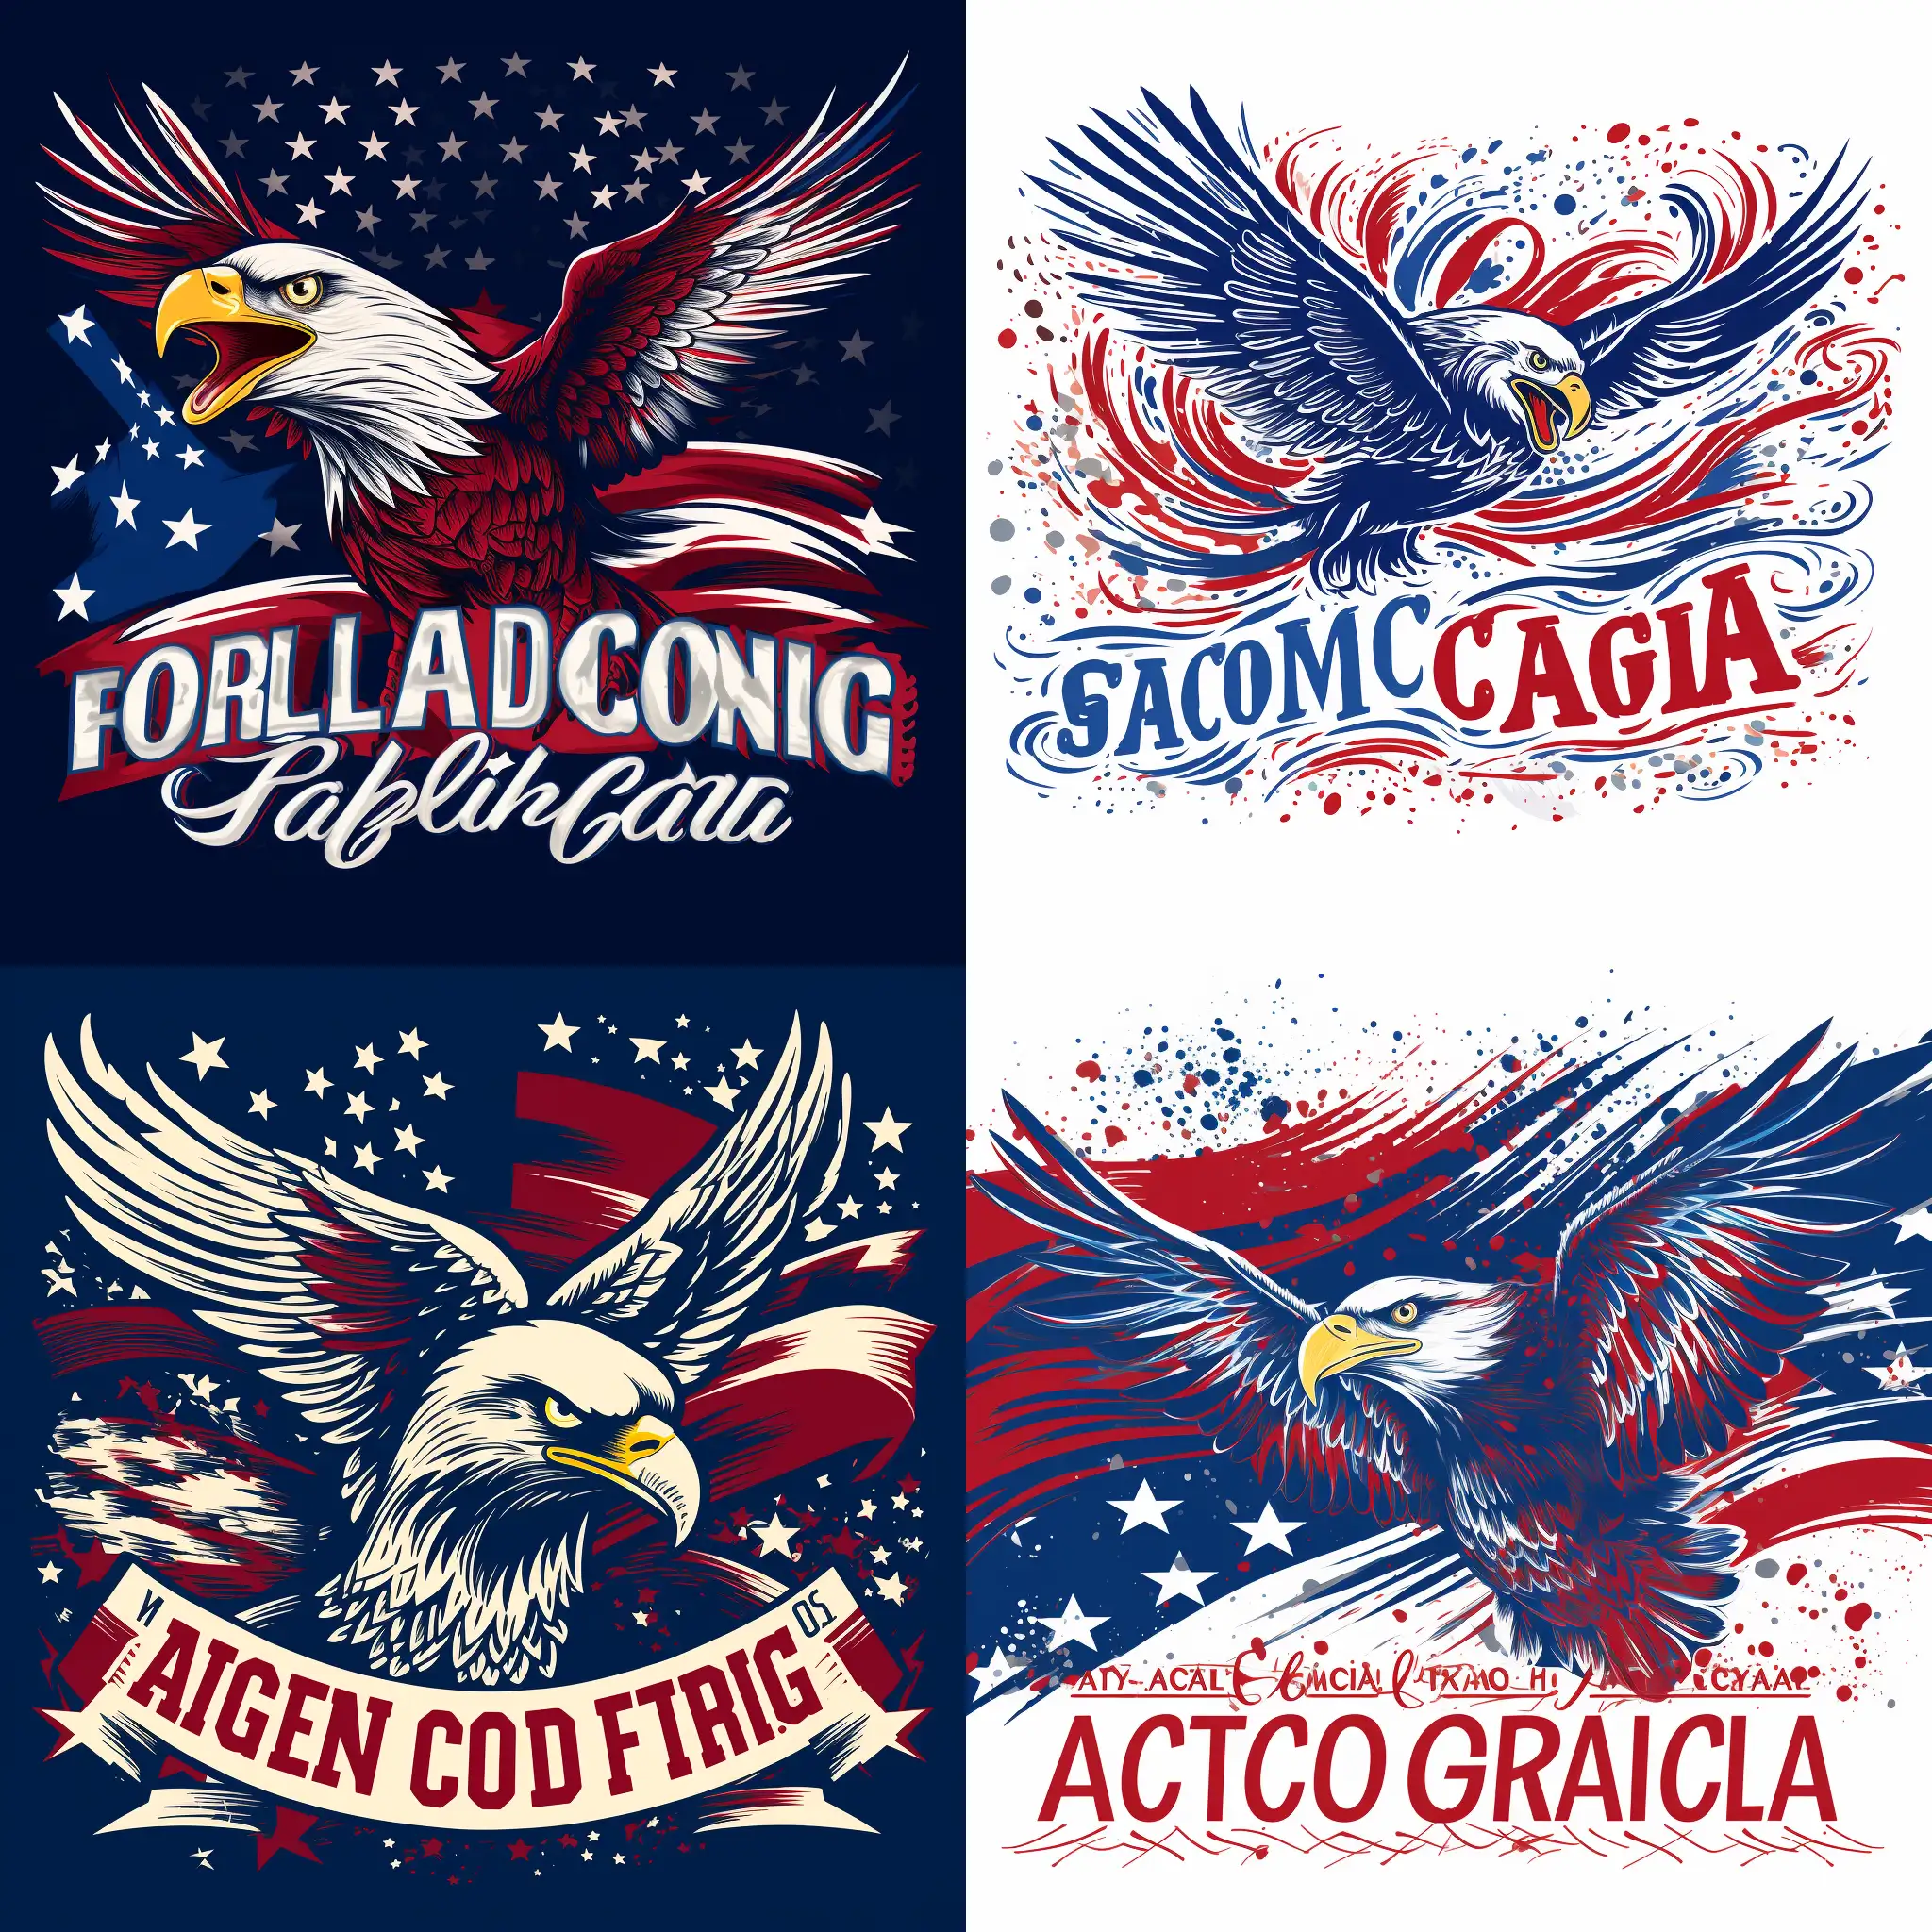 Action: Design a creative Artwork to ensures that the design is patriotic, respectful, and appealing, capturing the essence of American pride in a wearable form. 

Patriotic Slogan: Eagles Soaring, Fireworks Roaring, That's My America

Color Scheme: Stick to the traditional colors of the American flag: red, white, and blue. 

Typography: Select a font that is bold and legible, possibly with a traditional touch. Ensure the font complements the overall design without overpowering it. The text should be easily readable from a distance. Experiment with fonts and placements to ensure your message stands out. 

Additional Graphics: Subtly include other patriotic symbols like a silhouette of the Bald Eagle or a small Liberty Bell. Place these additional elements in a way that supports the main design. The text and imagery should work together harmoniously.

Humor and Puns: Use puns that are relevant to the theme of design. Ensure that the humor enhances the design and doesn't overshadow the overall aesthetic.

Placement: Pay attention to placement of Artwork in center and keep 10mm margin all around the design.

Background: Pure white background.